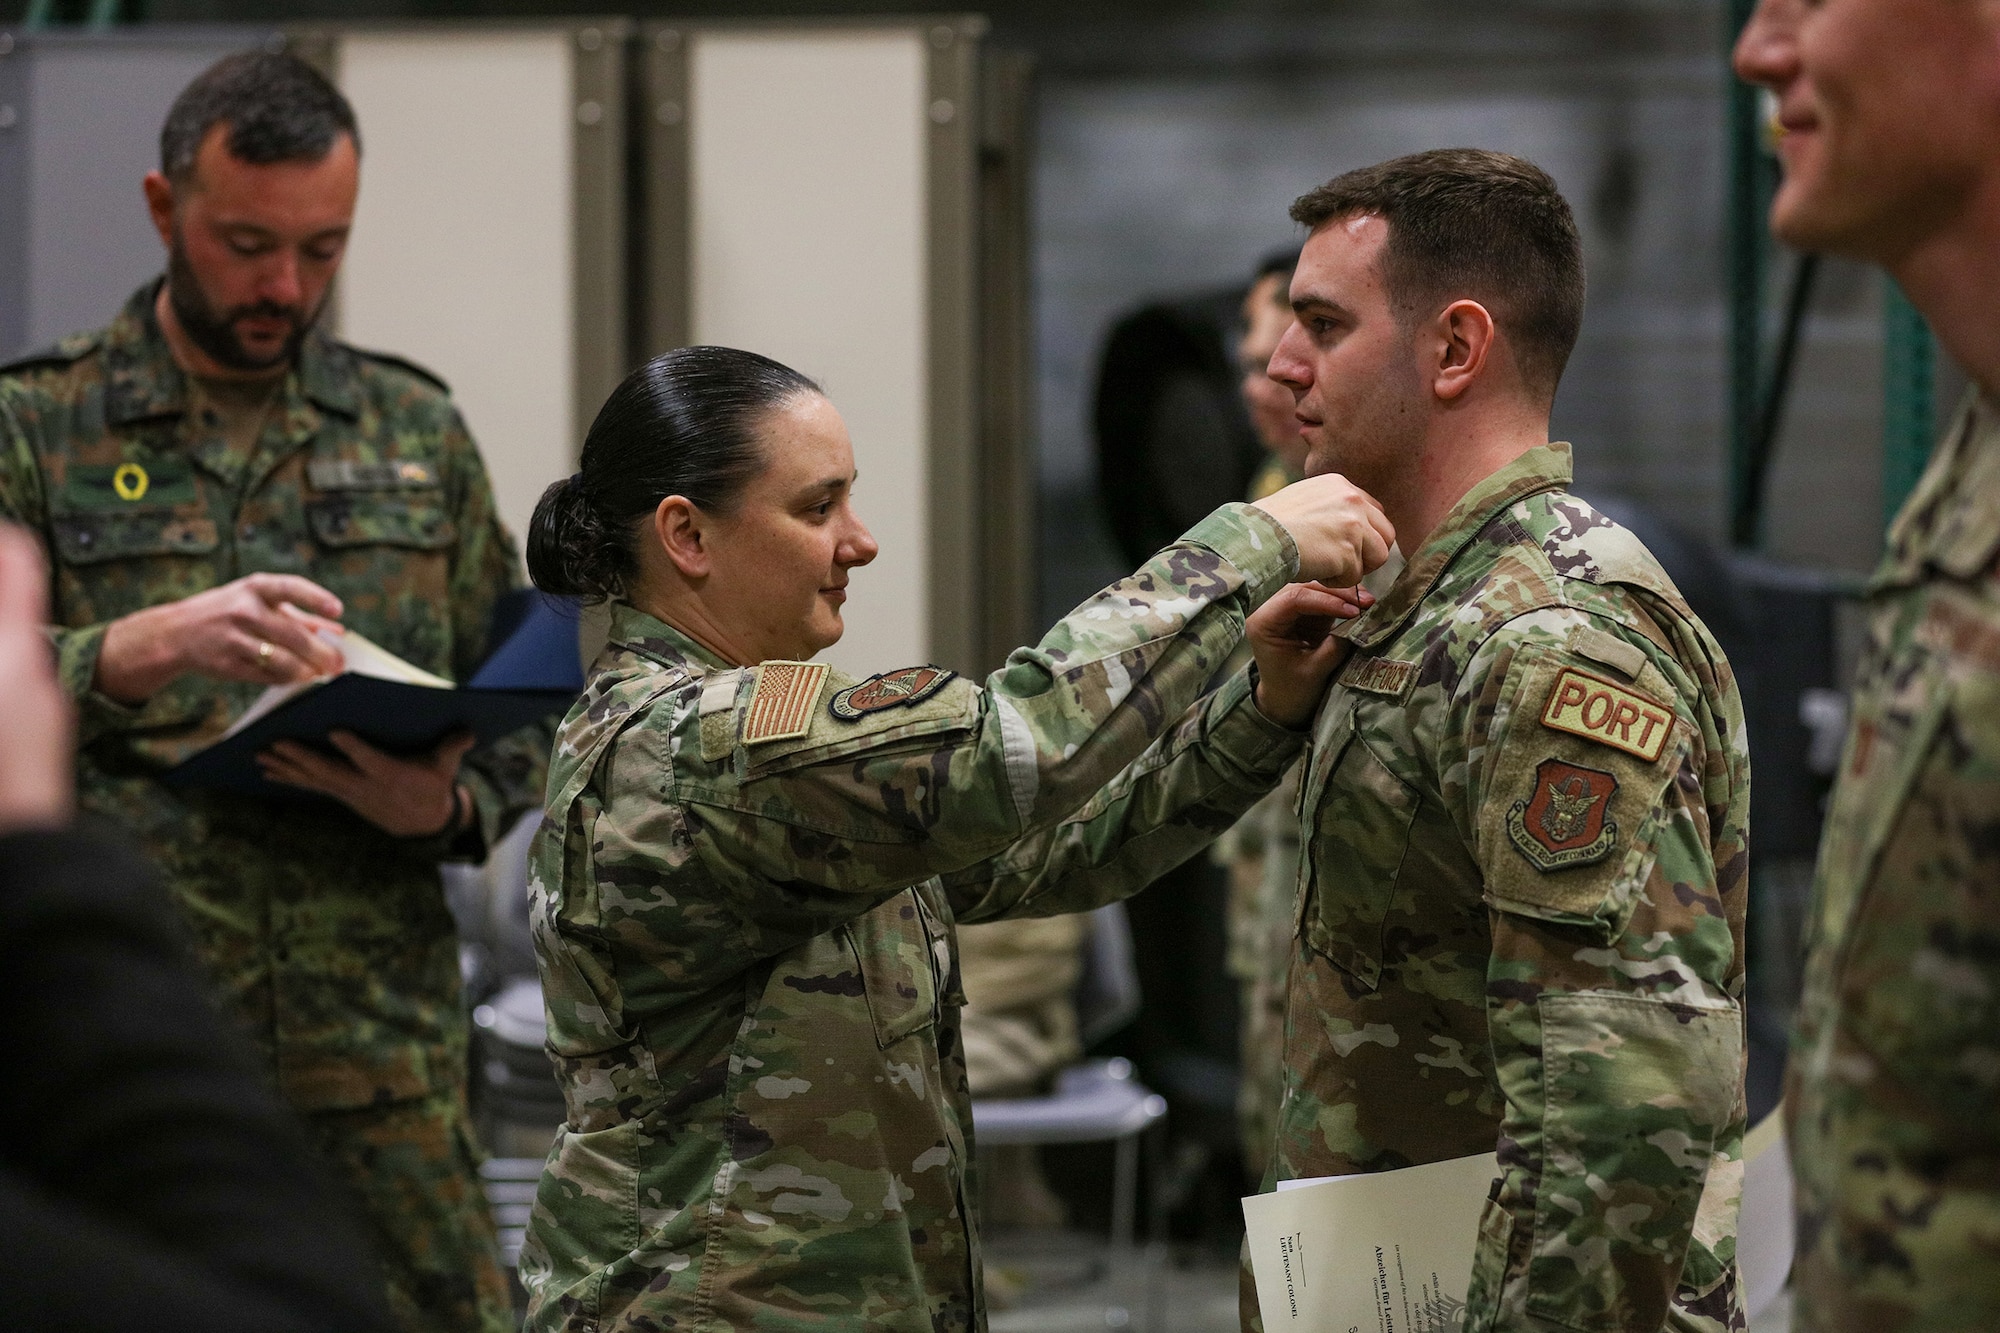 Lt. Col. Nicole Schatz, 88th Security Forces Squadron commander, pins a silver badge onto Tech. Sgt. Gabriel Clark, 87th Aerial Port Squadron ramp operations representative, after competing in the German Armed Forces Military Proficiency Badge qualification test at Wright-Patterson Air Force Base, Ohio, Feb. 3, 2023.